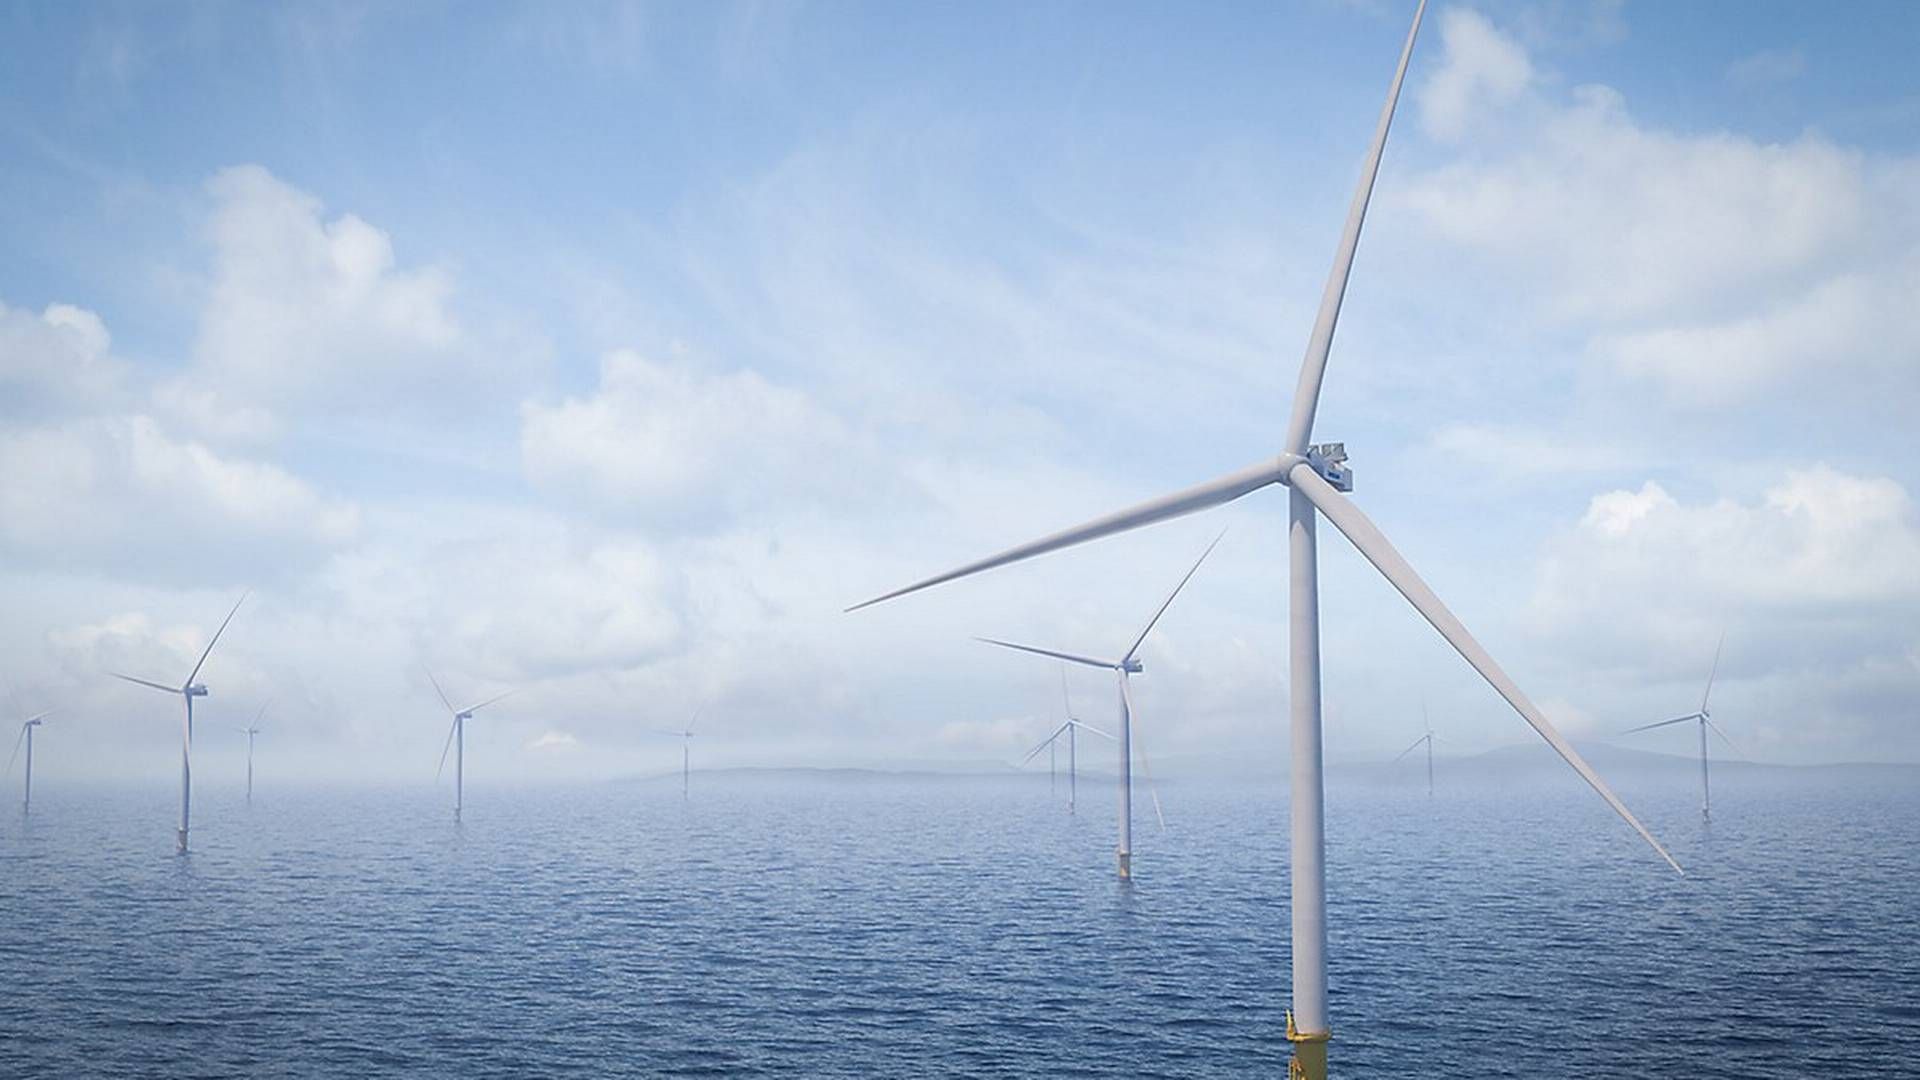 The offshore wind farm is dominated by Danish players. Vestas will supply the turbines for the project, which Cadeler will install. NKT will be responsible for the cable system, while Bladt and Semco Maritime will supply two substations. | Photo: vestas